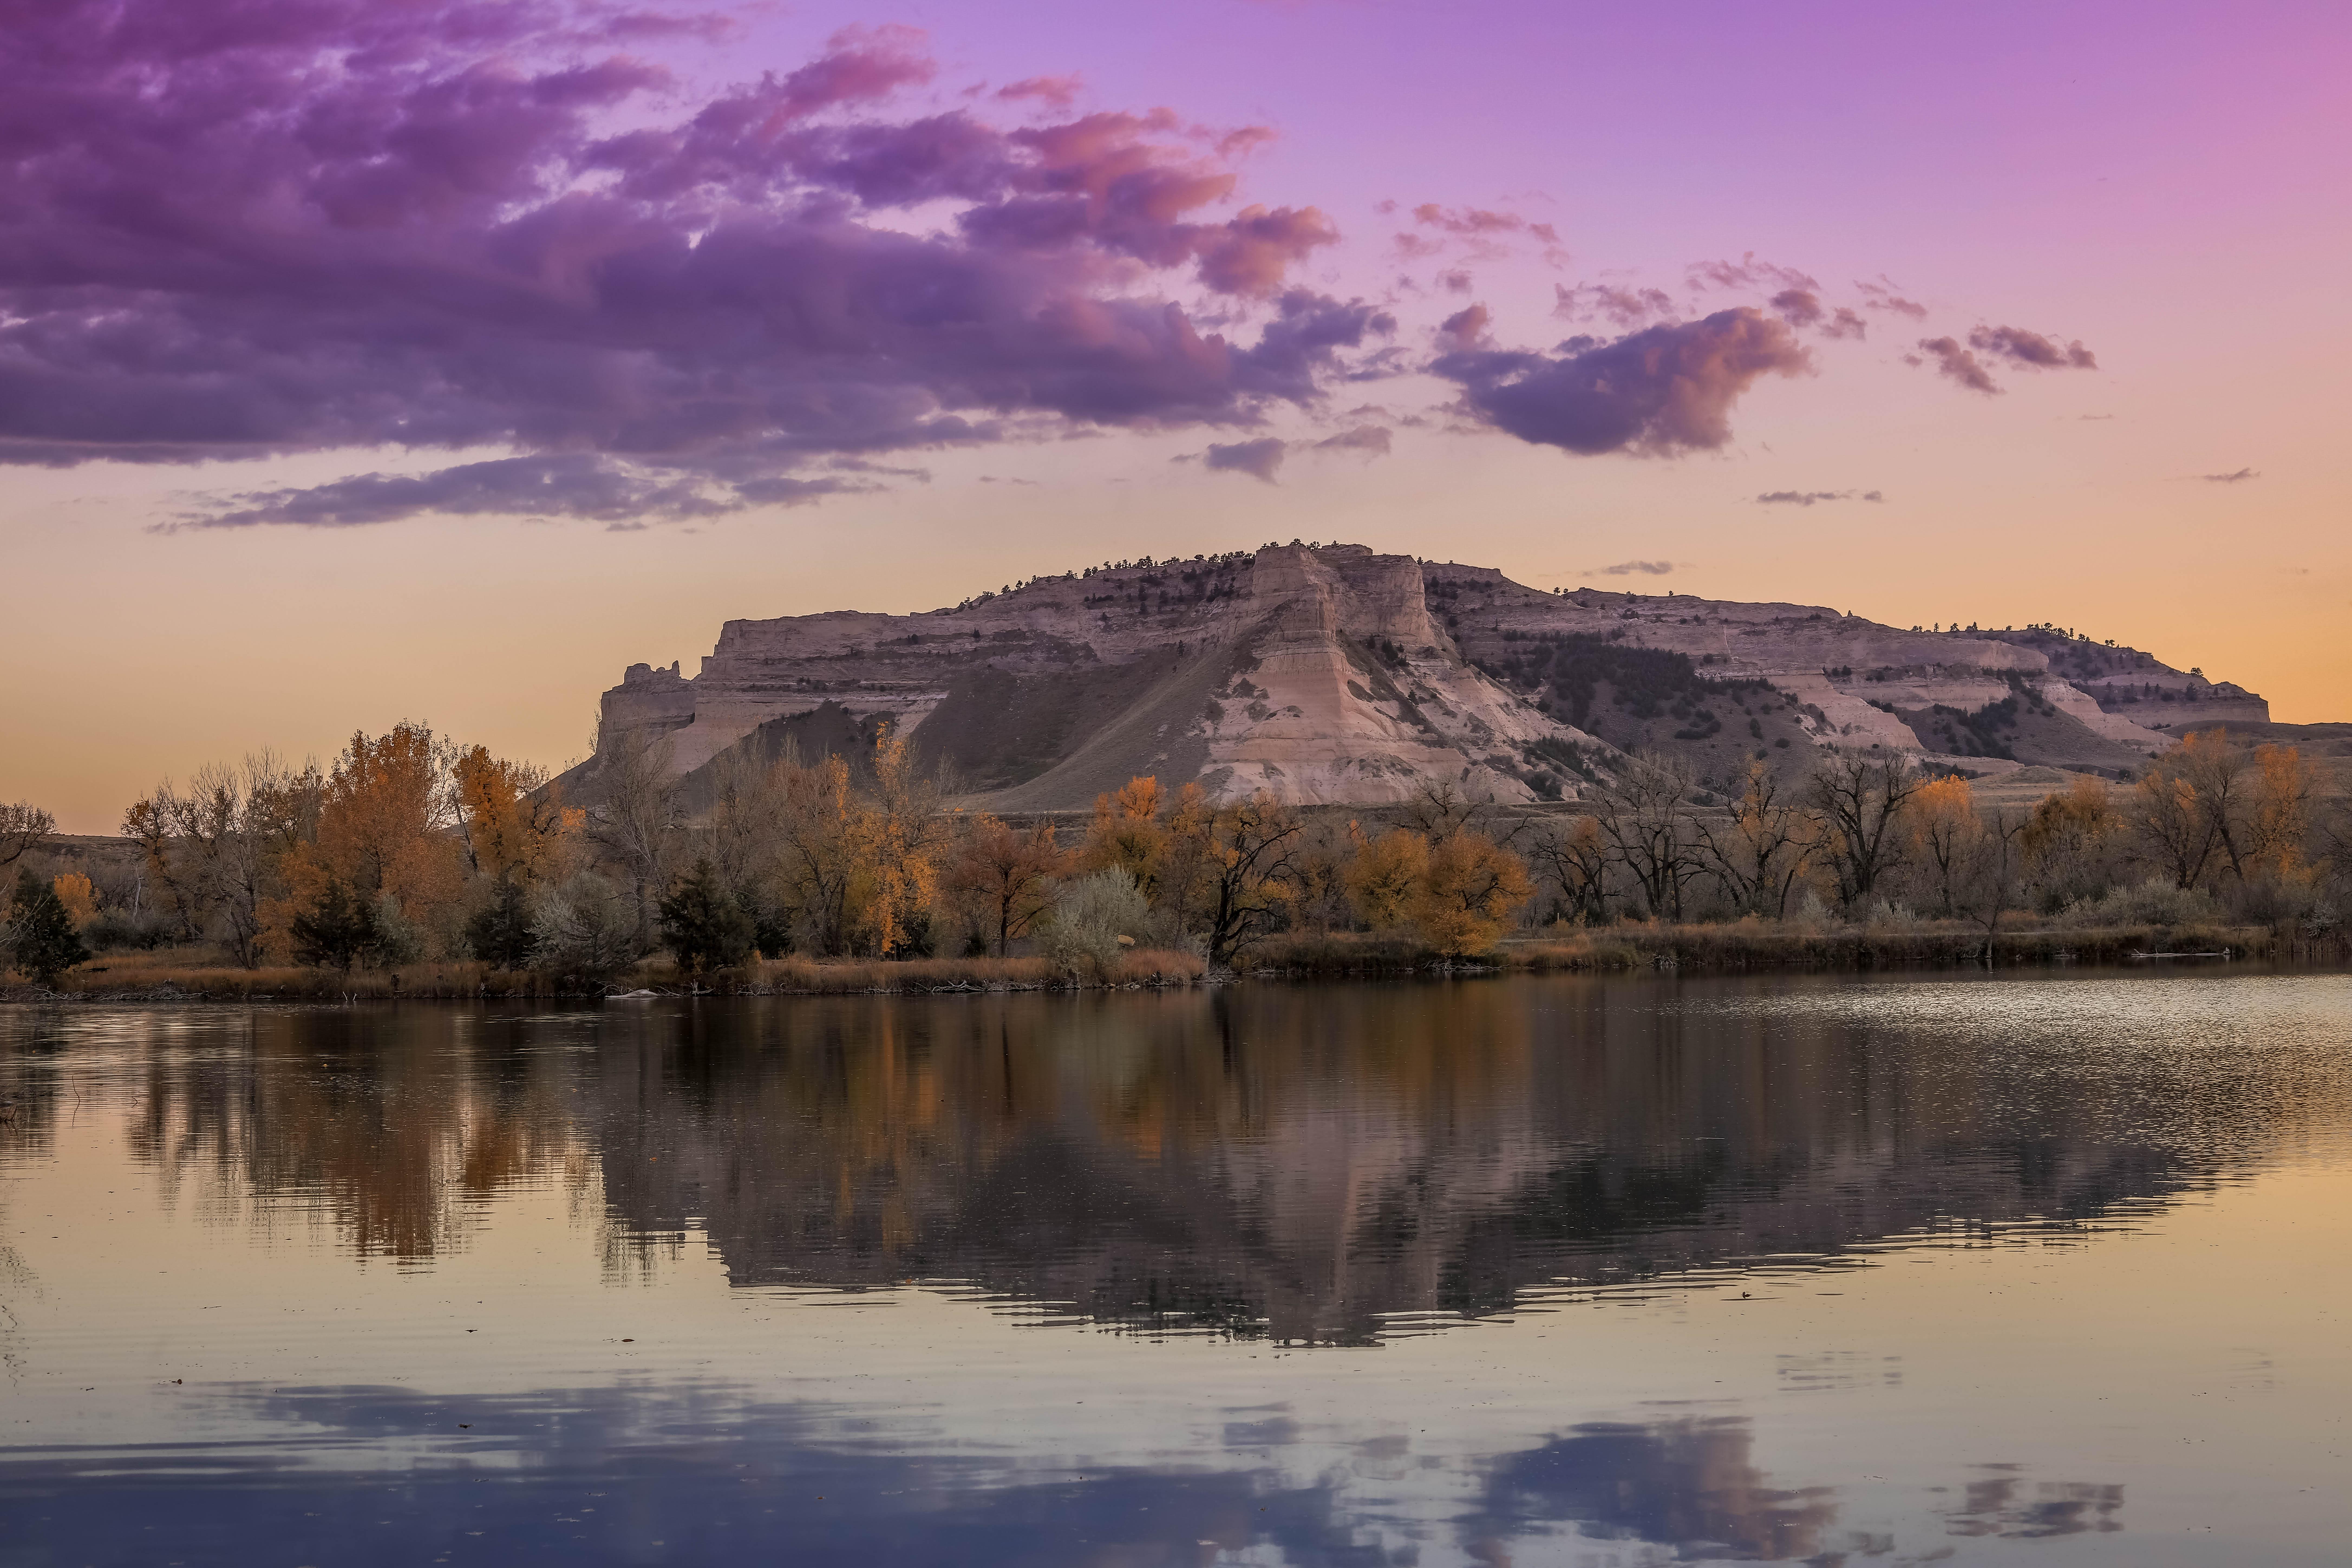 A pink sky and dramatic bluff are seen reflected in water.